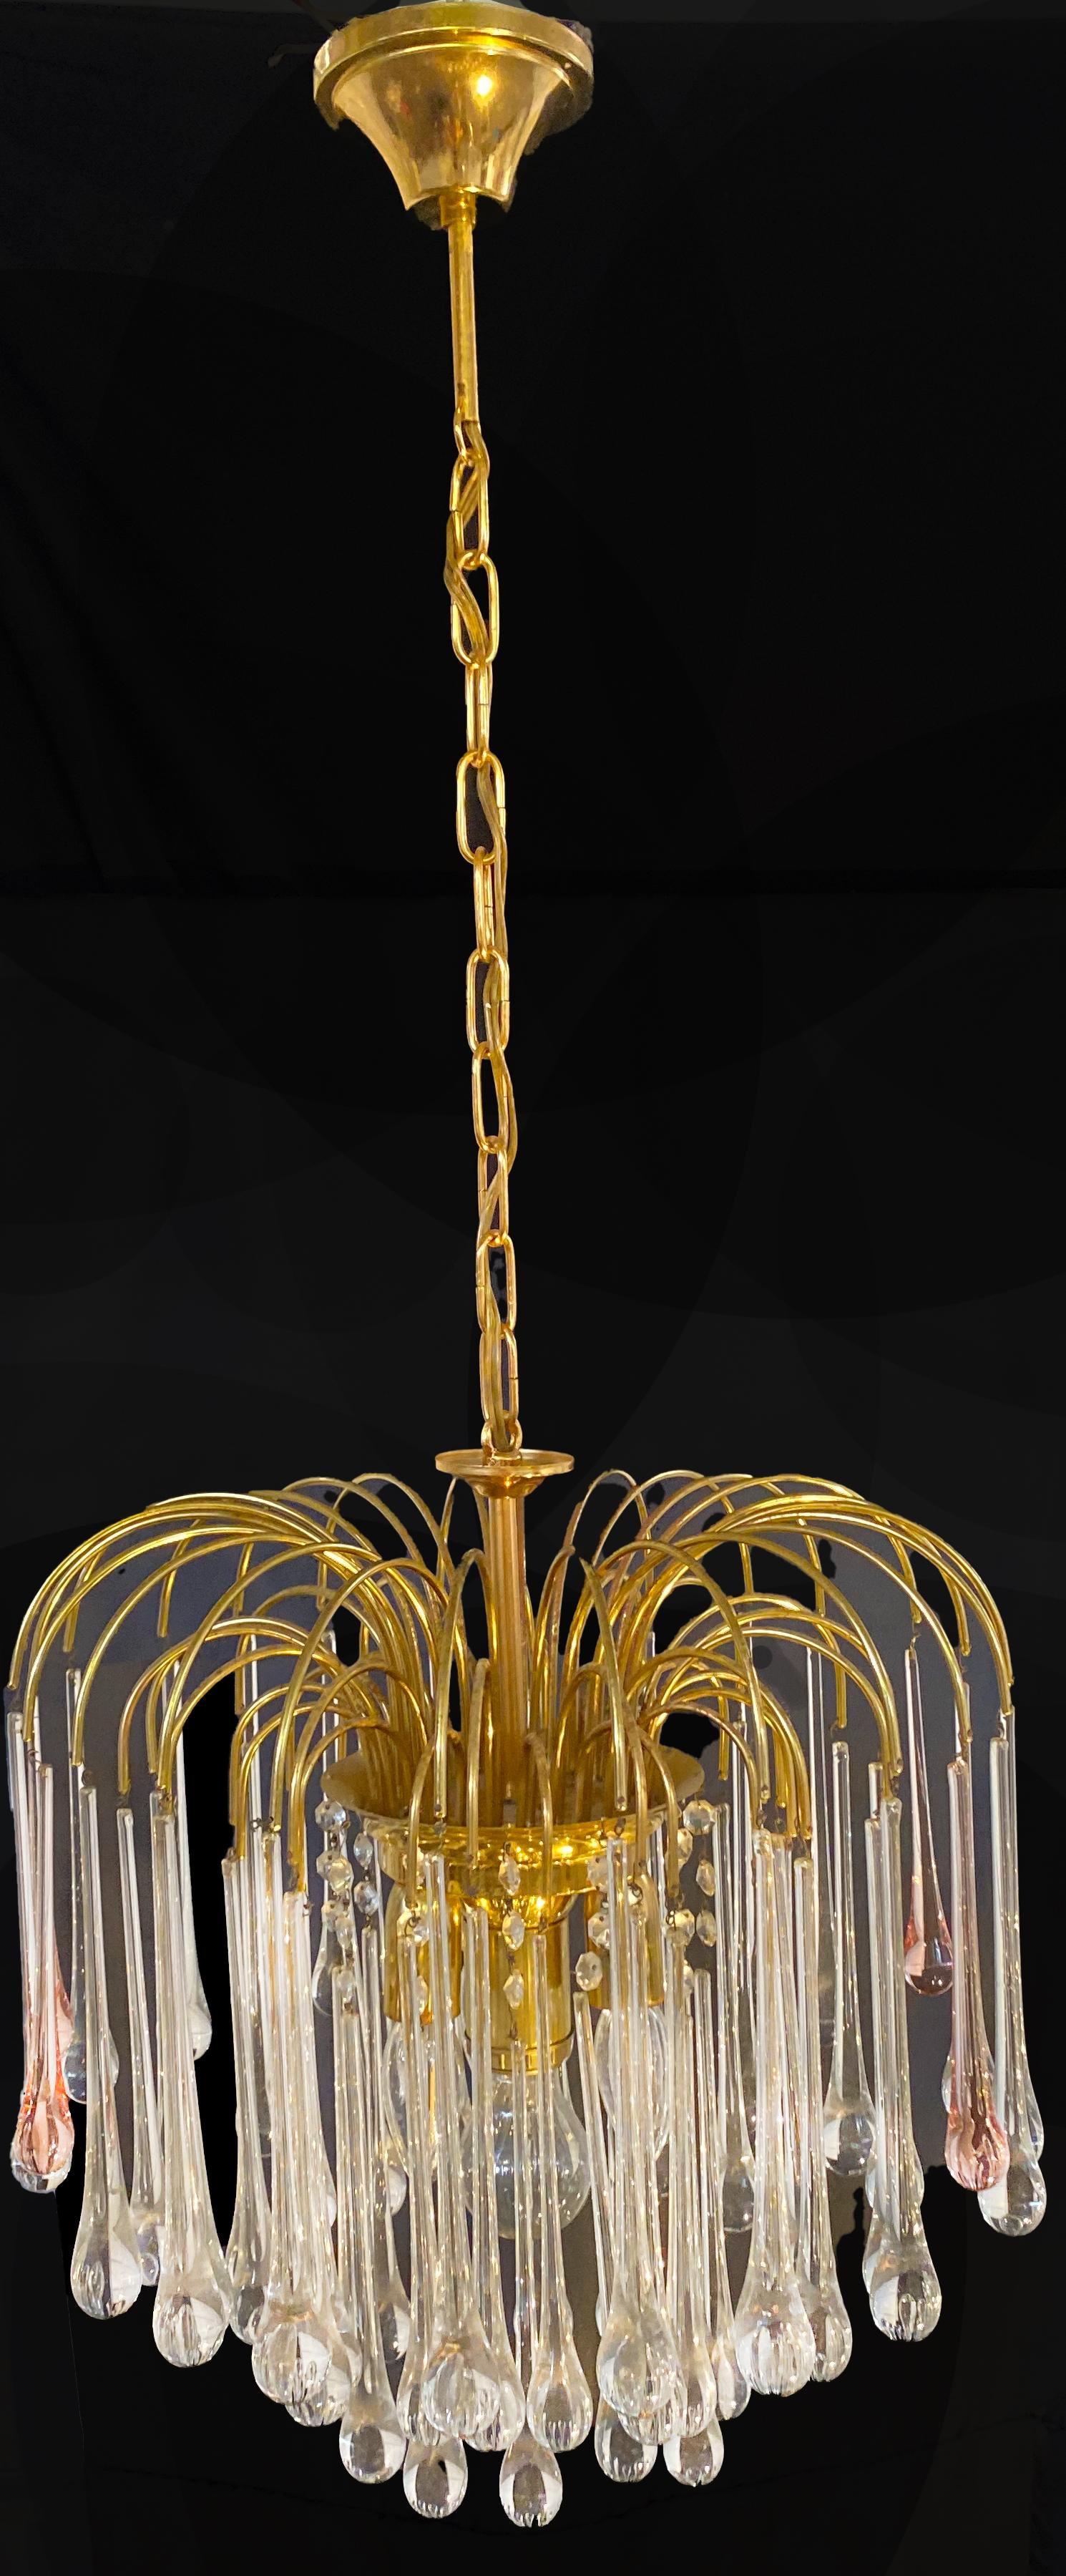 Art Glass Lady Isabelle Murano Chandelier, 68 Precious White and Pink Drops, 1980s